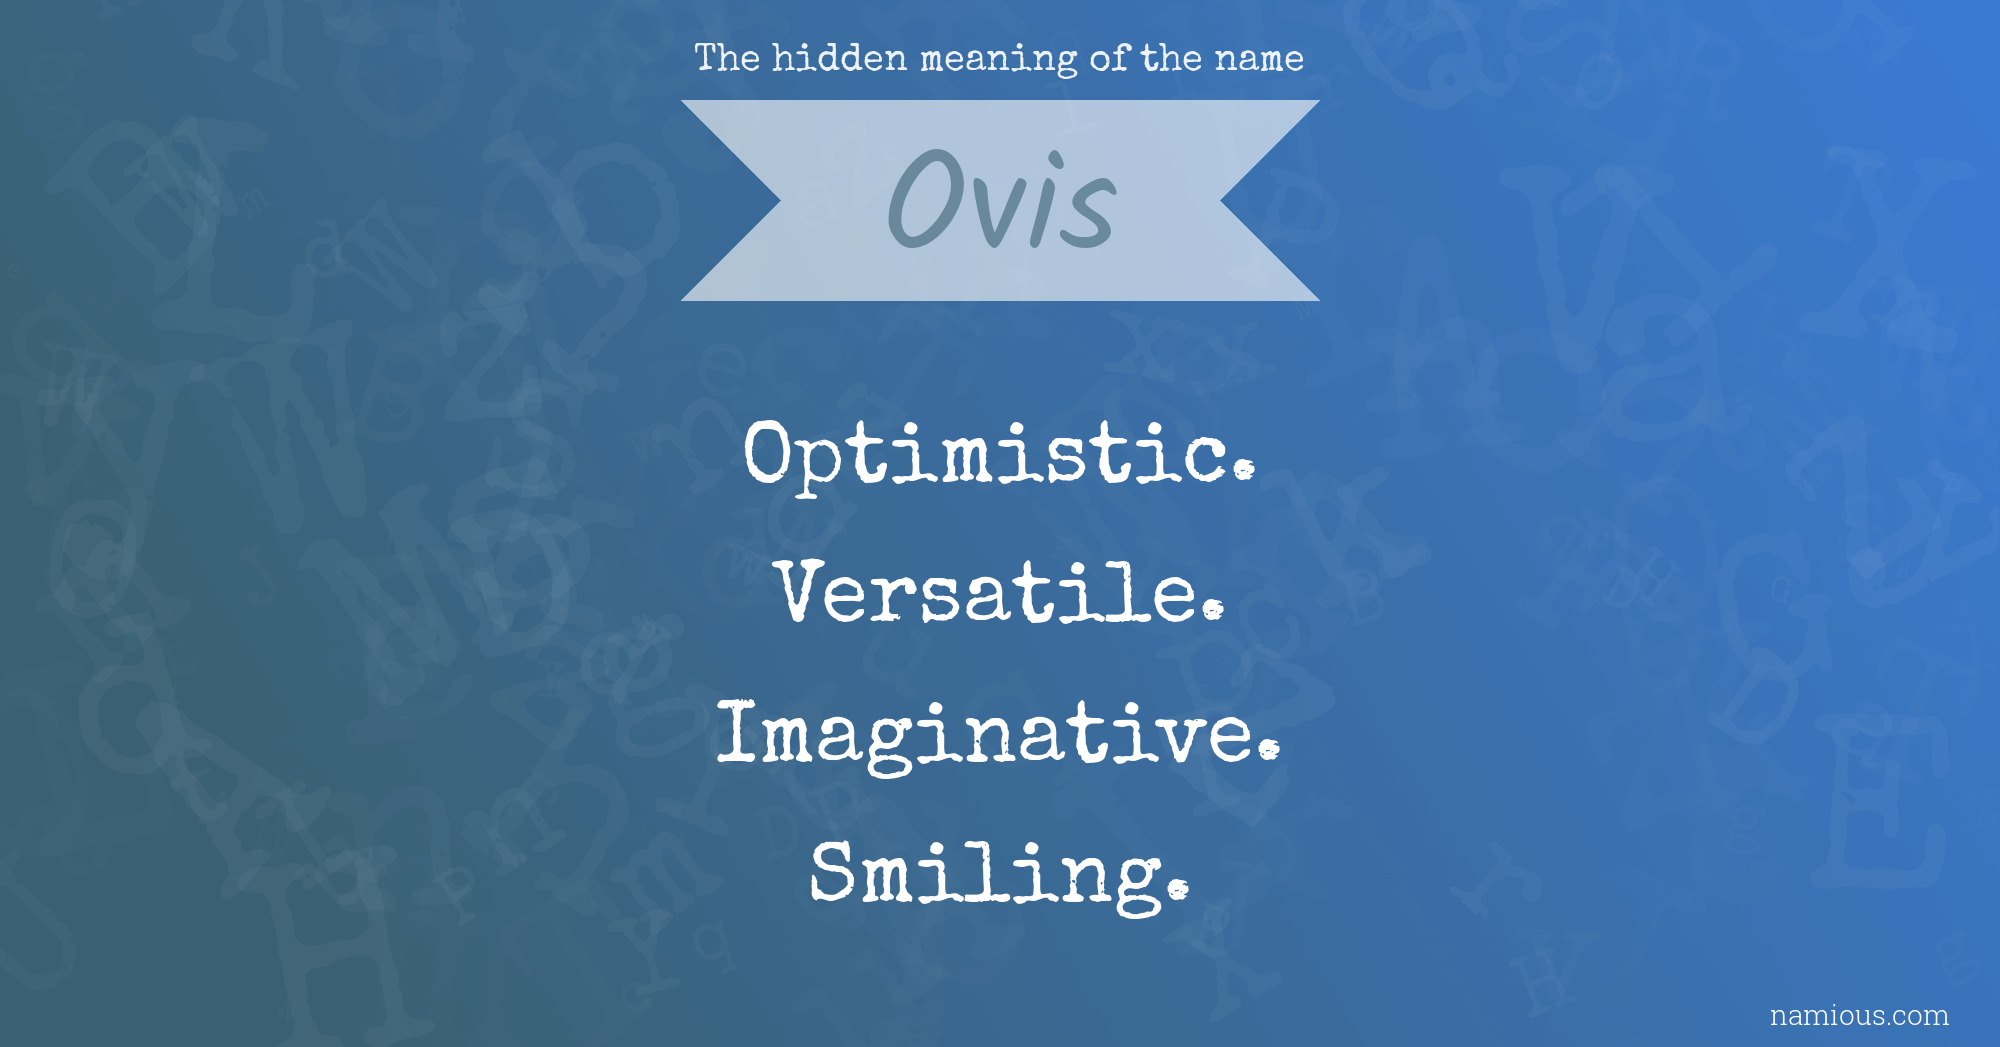 The hidden meaning of the name Ovis